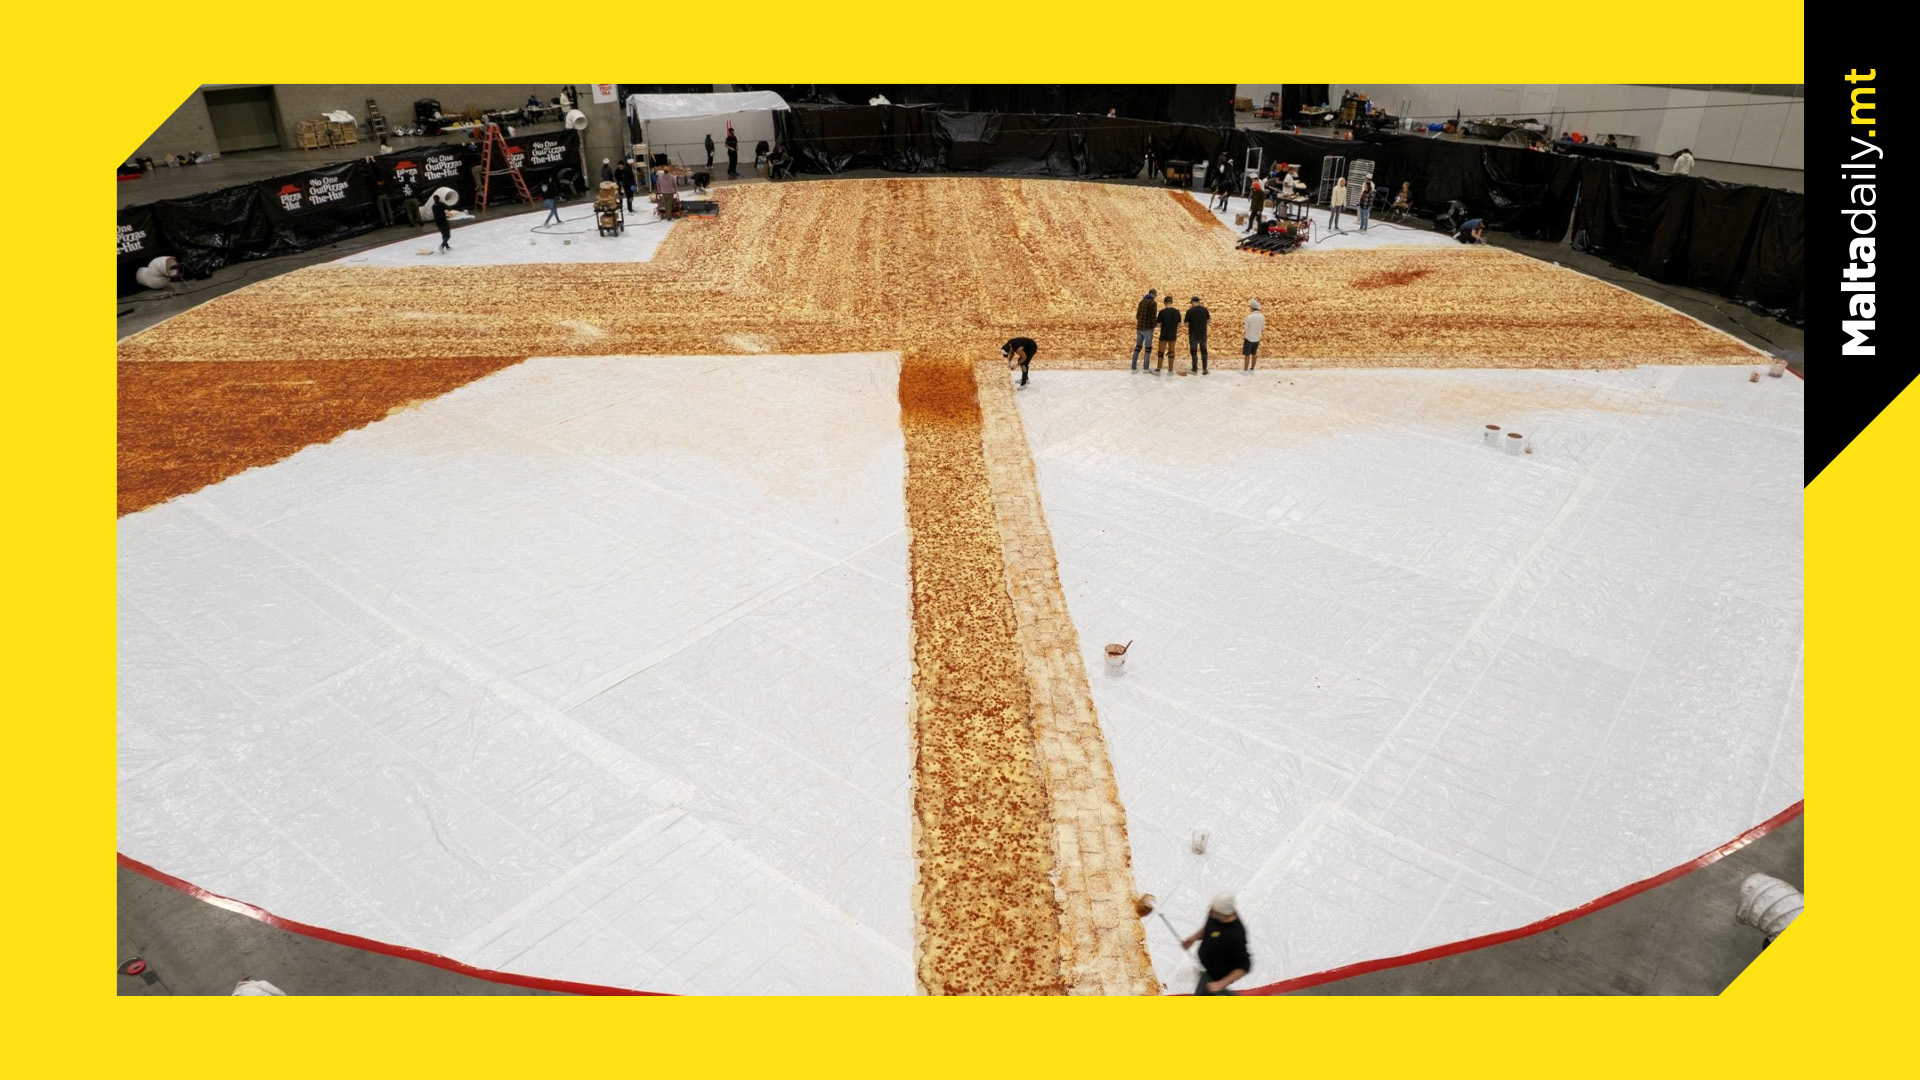 Pizza Hut attempts to break record for 'World's Largest Pizza' in Los Angeles